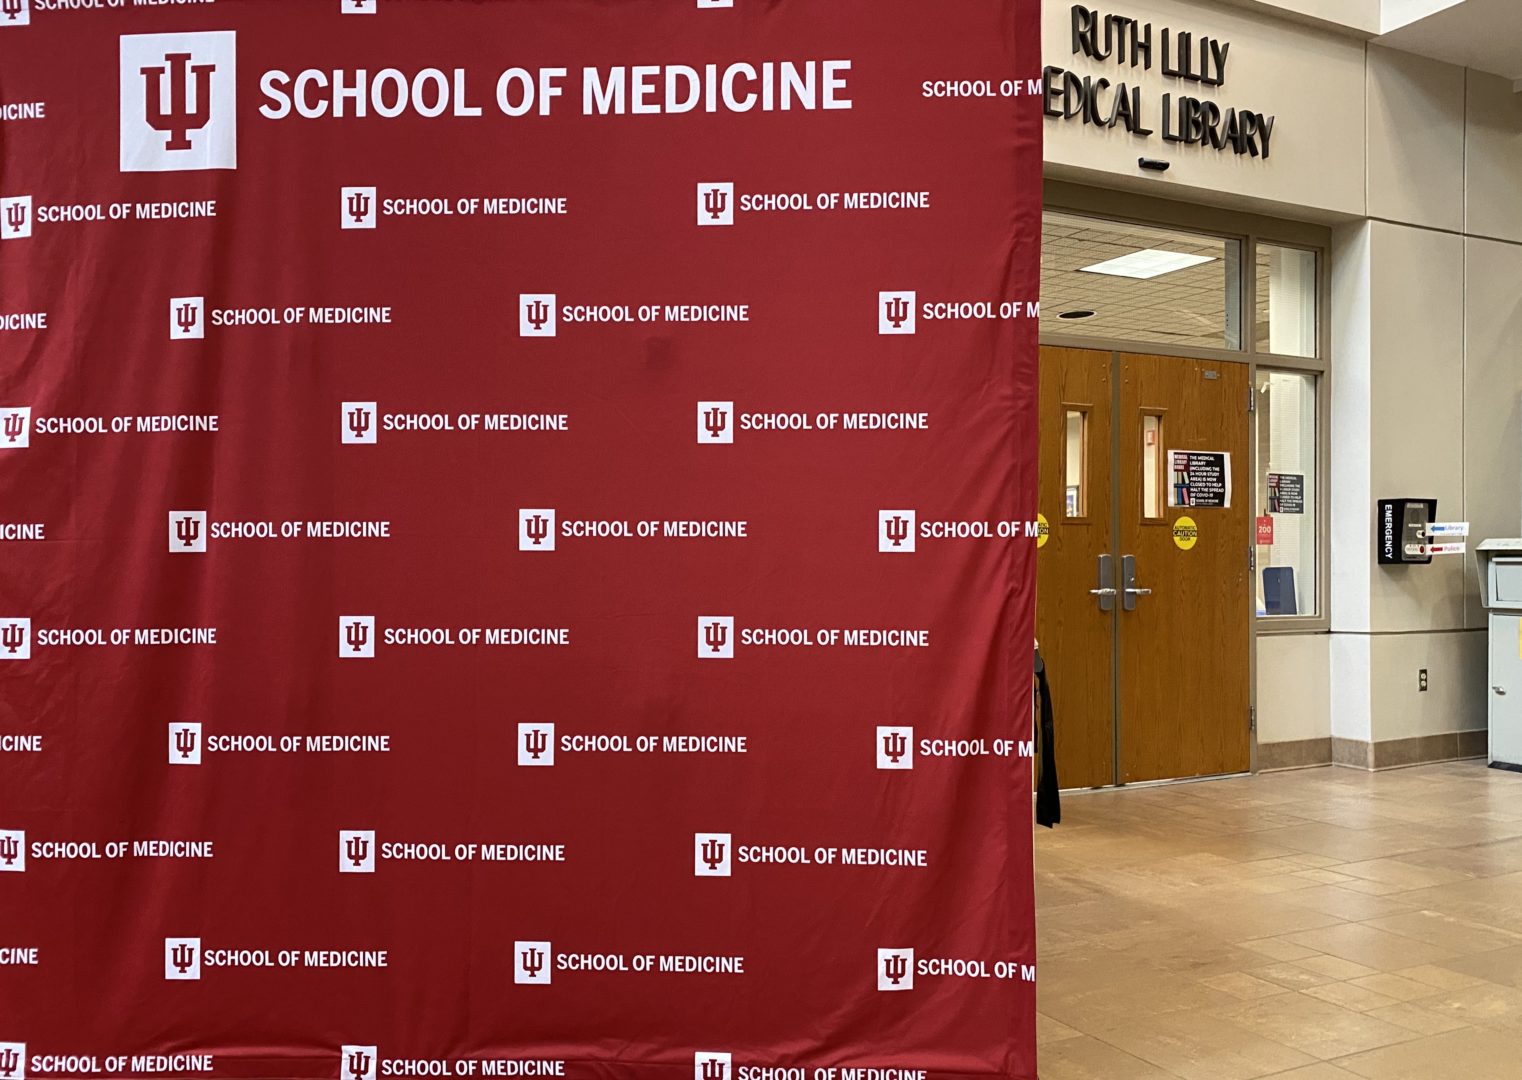 An image of IU School Of Medicine sign standing in front of Ruth Lilly Medical Library